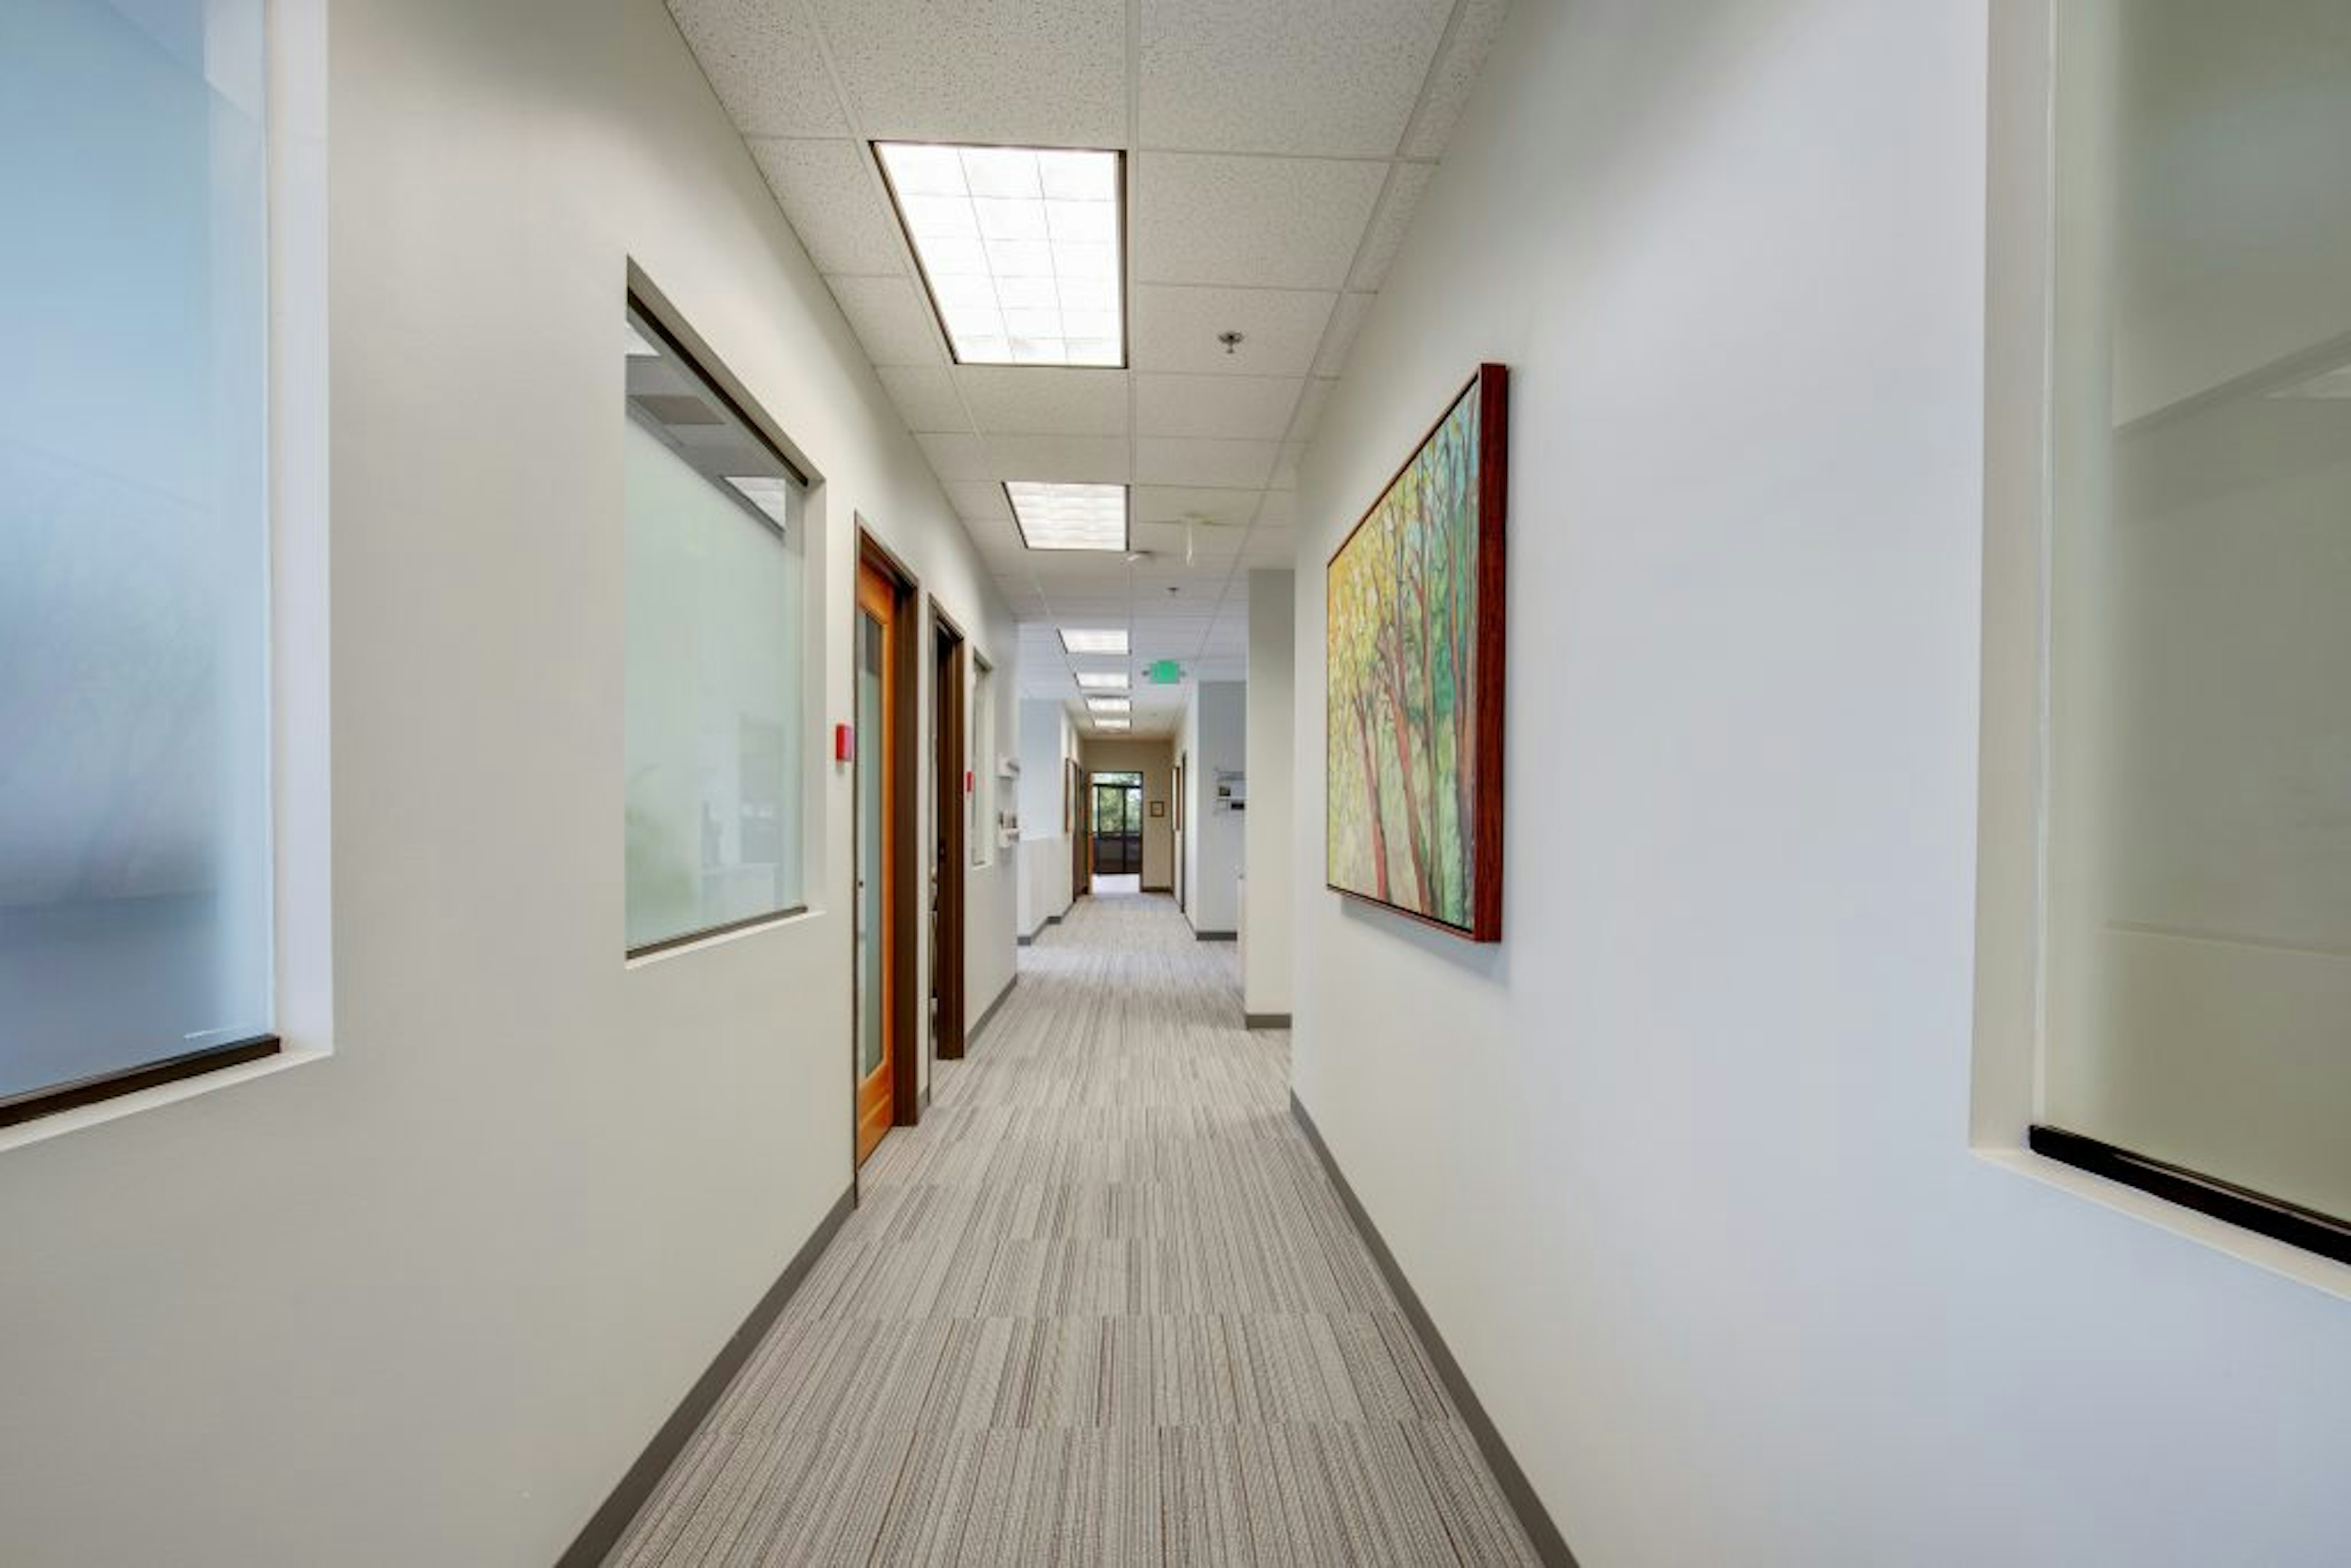 Hallway in moving beyond trauma. Carpeted floors, beige walls, and painted tree art hung on wall.